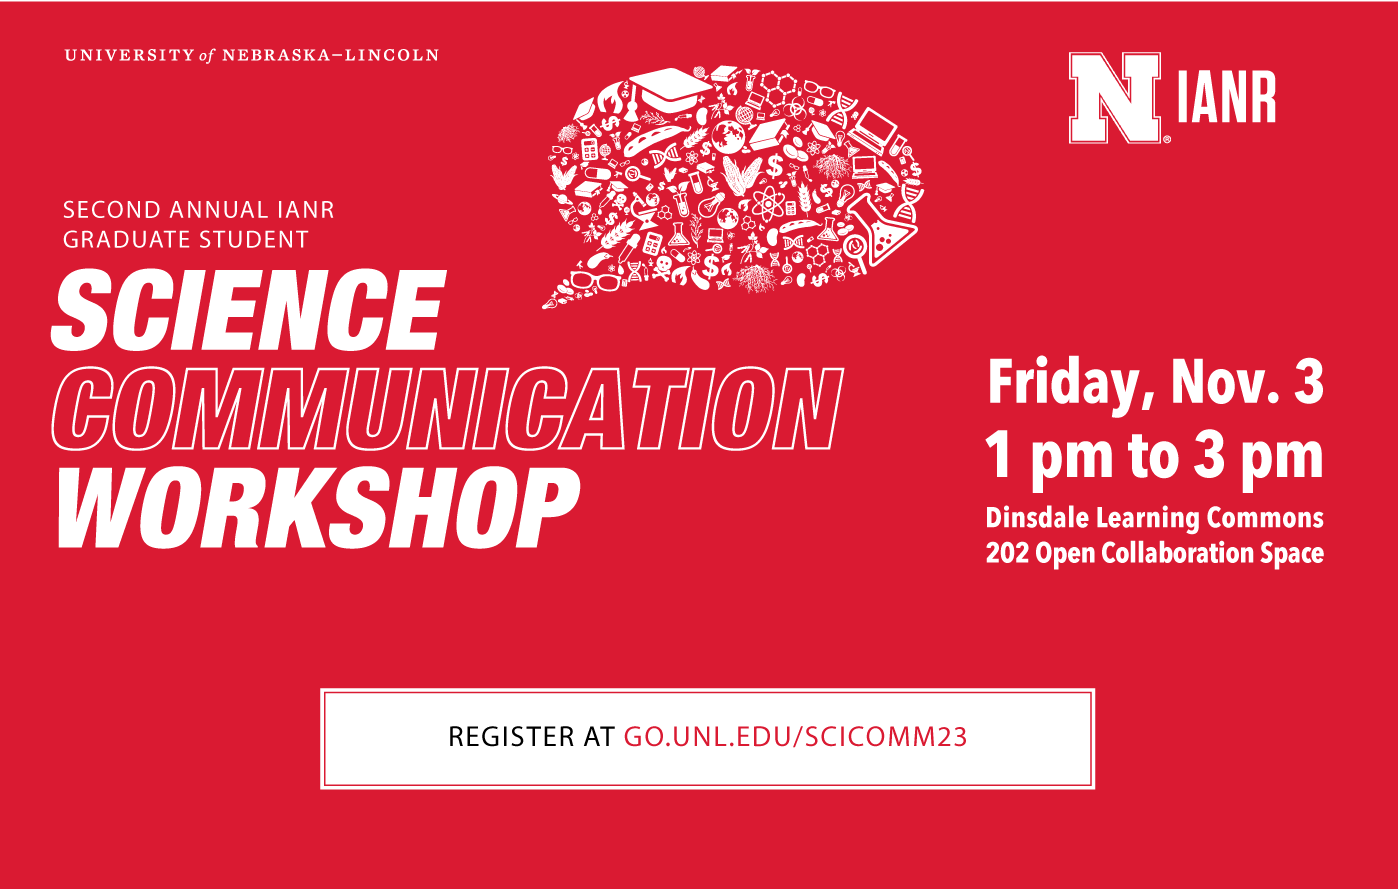 Second Annual IANR Graduate Student Science Communication Workshop. Nov. 3, 2023 Time: 1:00 p.m. - 3:00 p.m. Dinsdale Family Learning Commons Room: 202 Register at Go.unl.edu/scicomm23